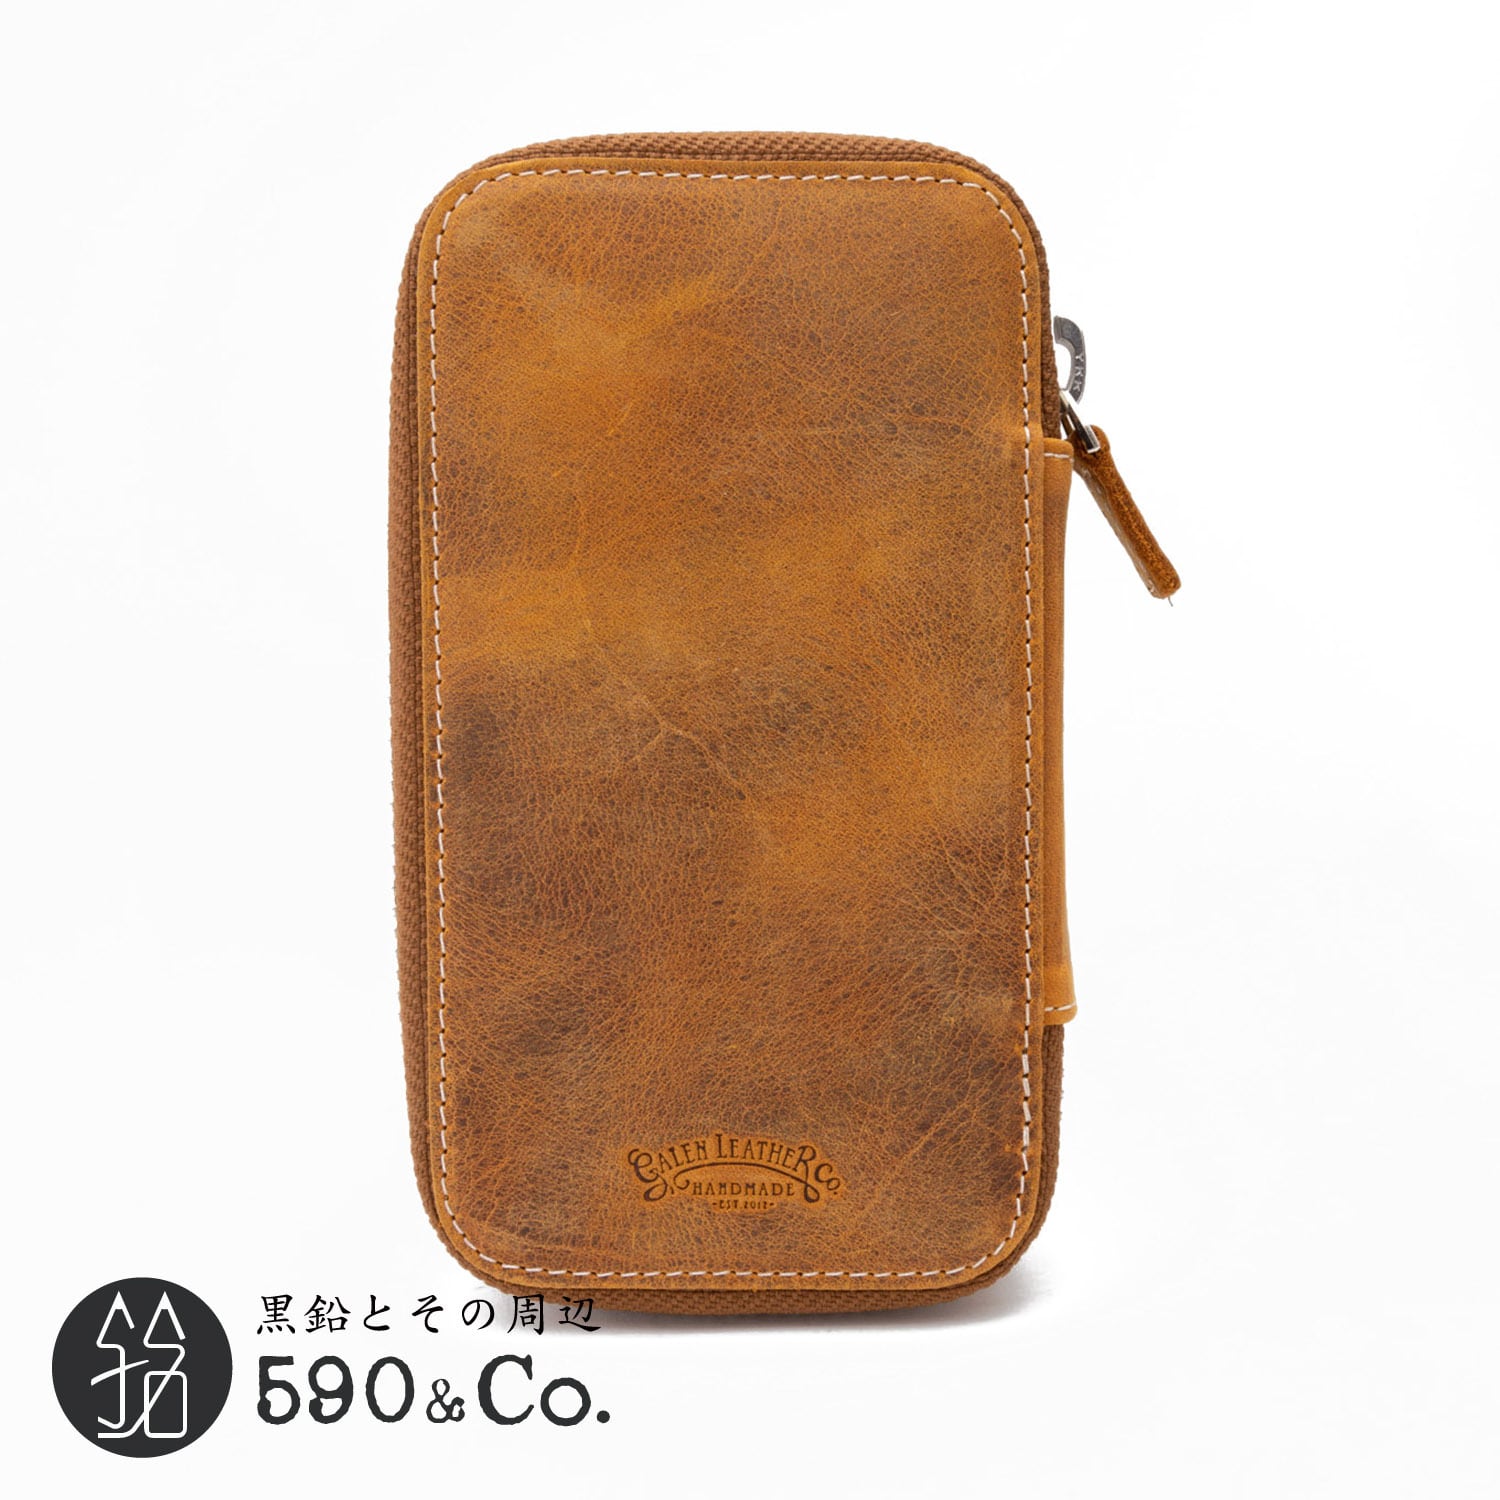 Galen Leather | 590&Co.